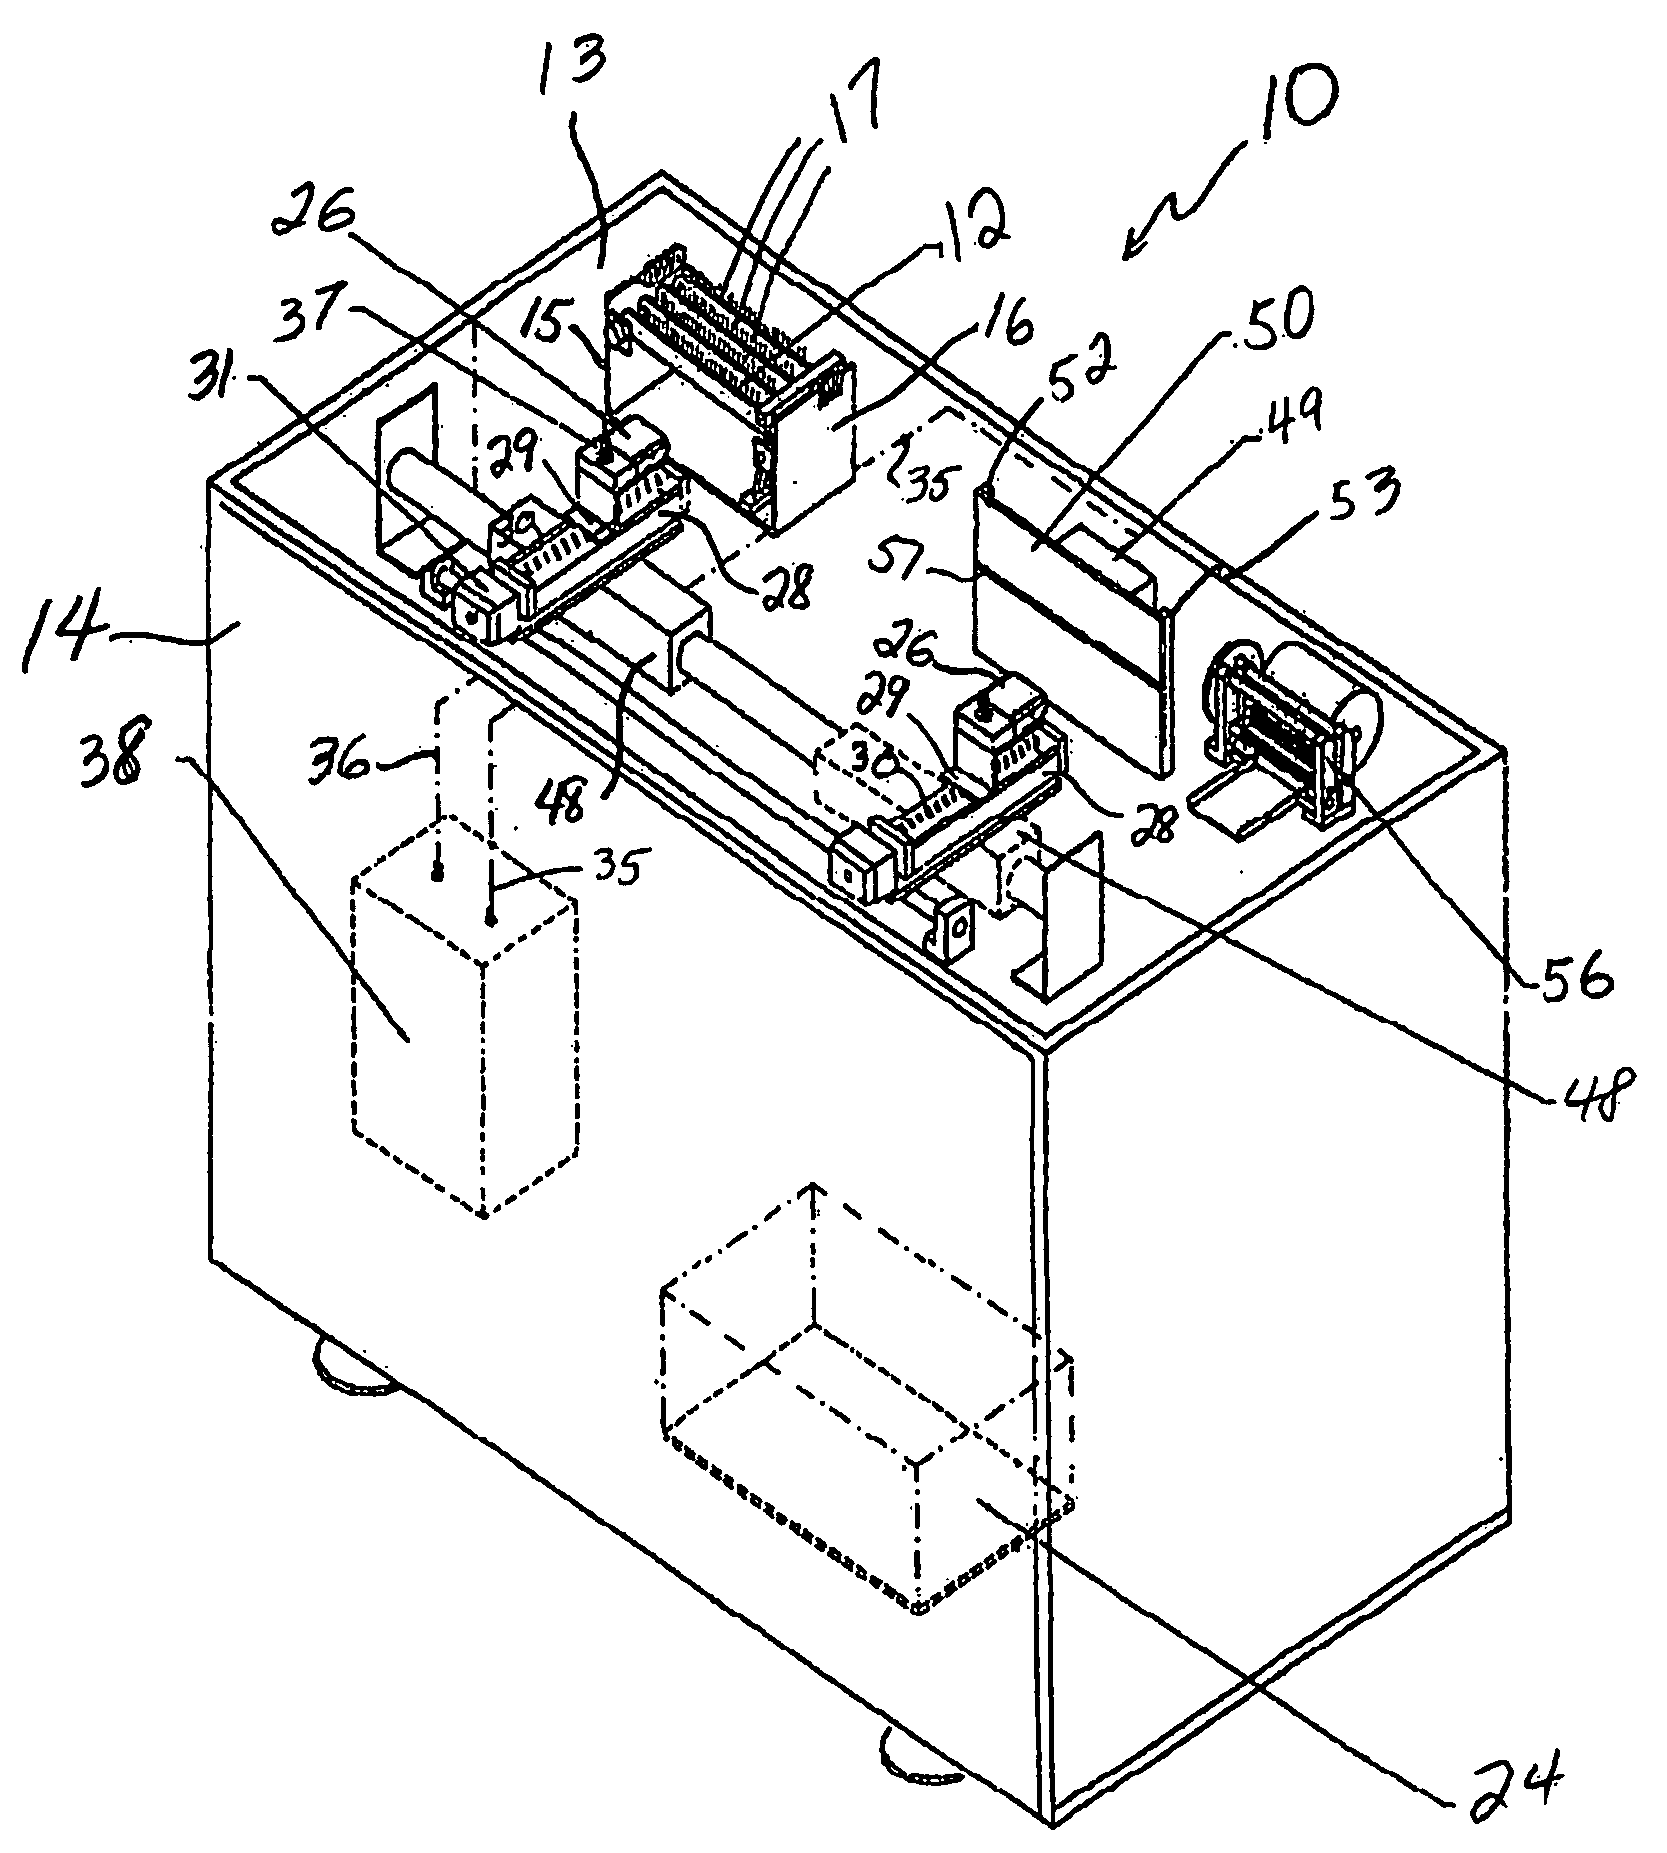 Automatic fiber processing system including method and apparatus for producing end-aligned fiber samples